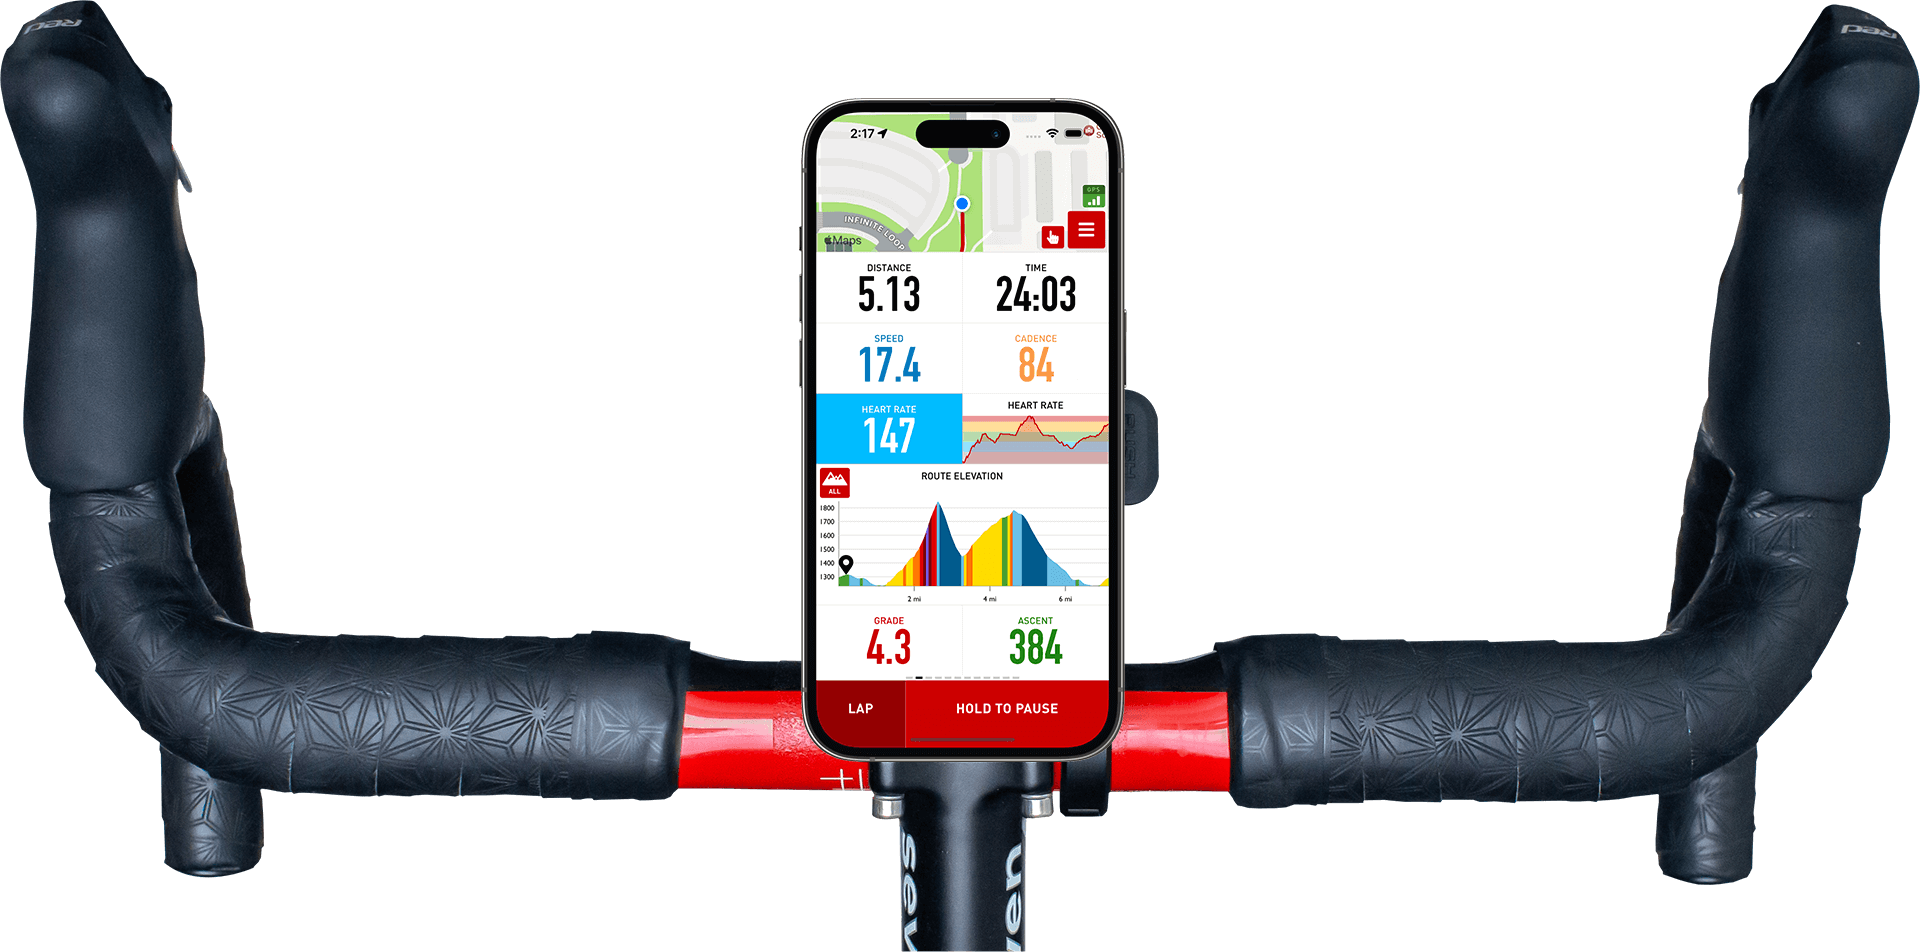 Road bike handlebars with a phone mounted and the Cadence app on the screen.